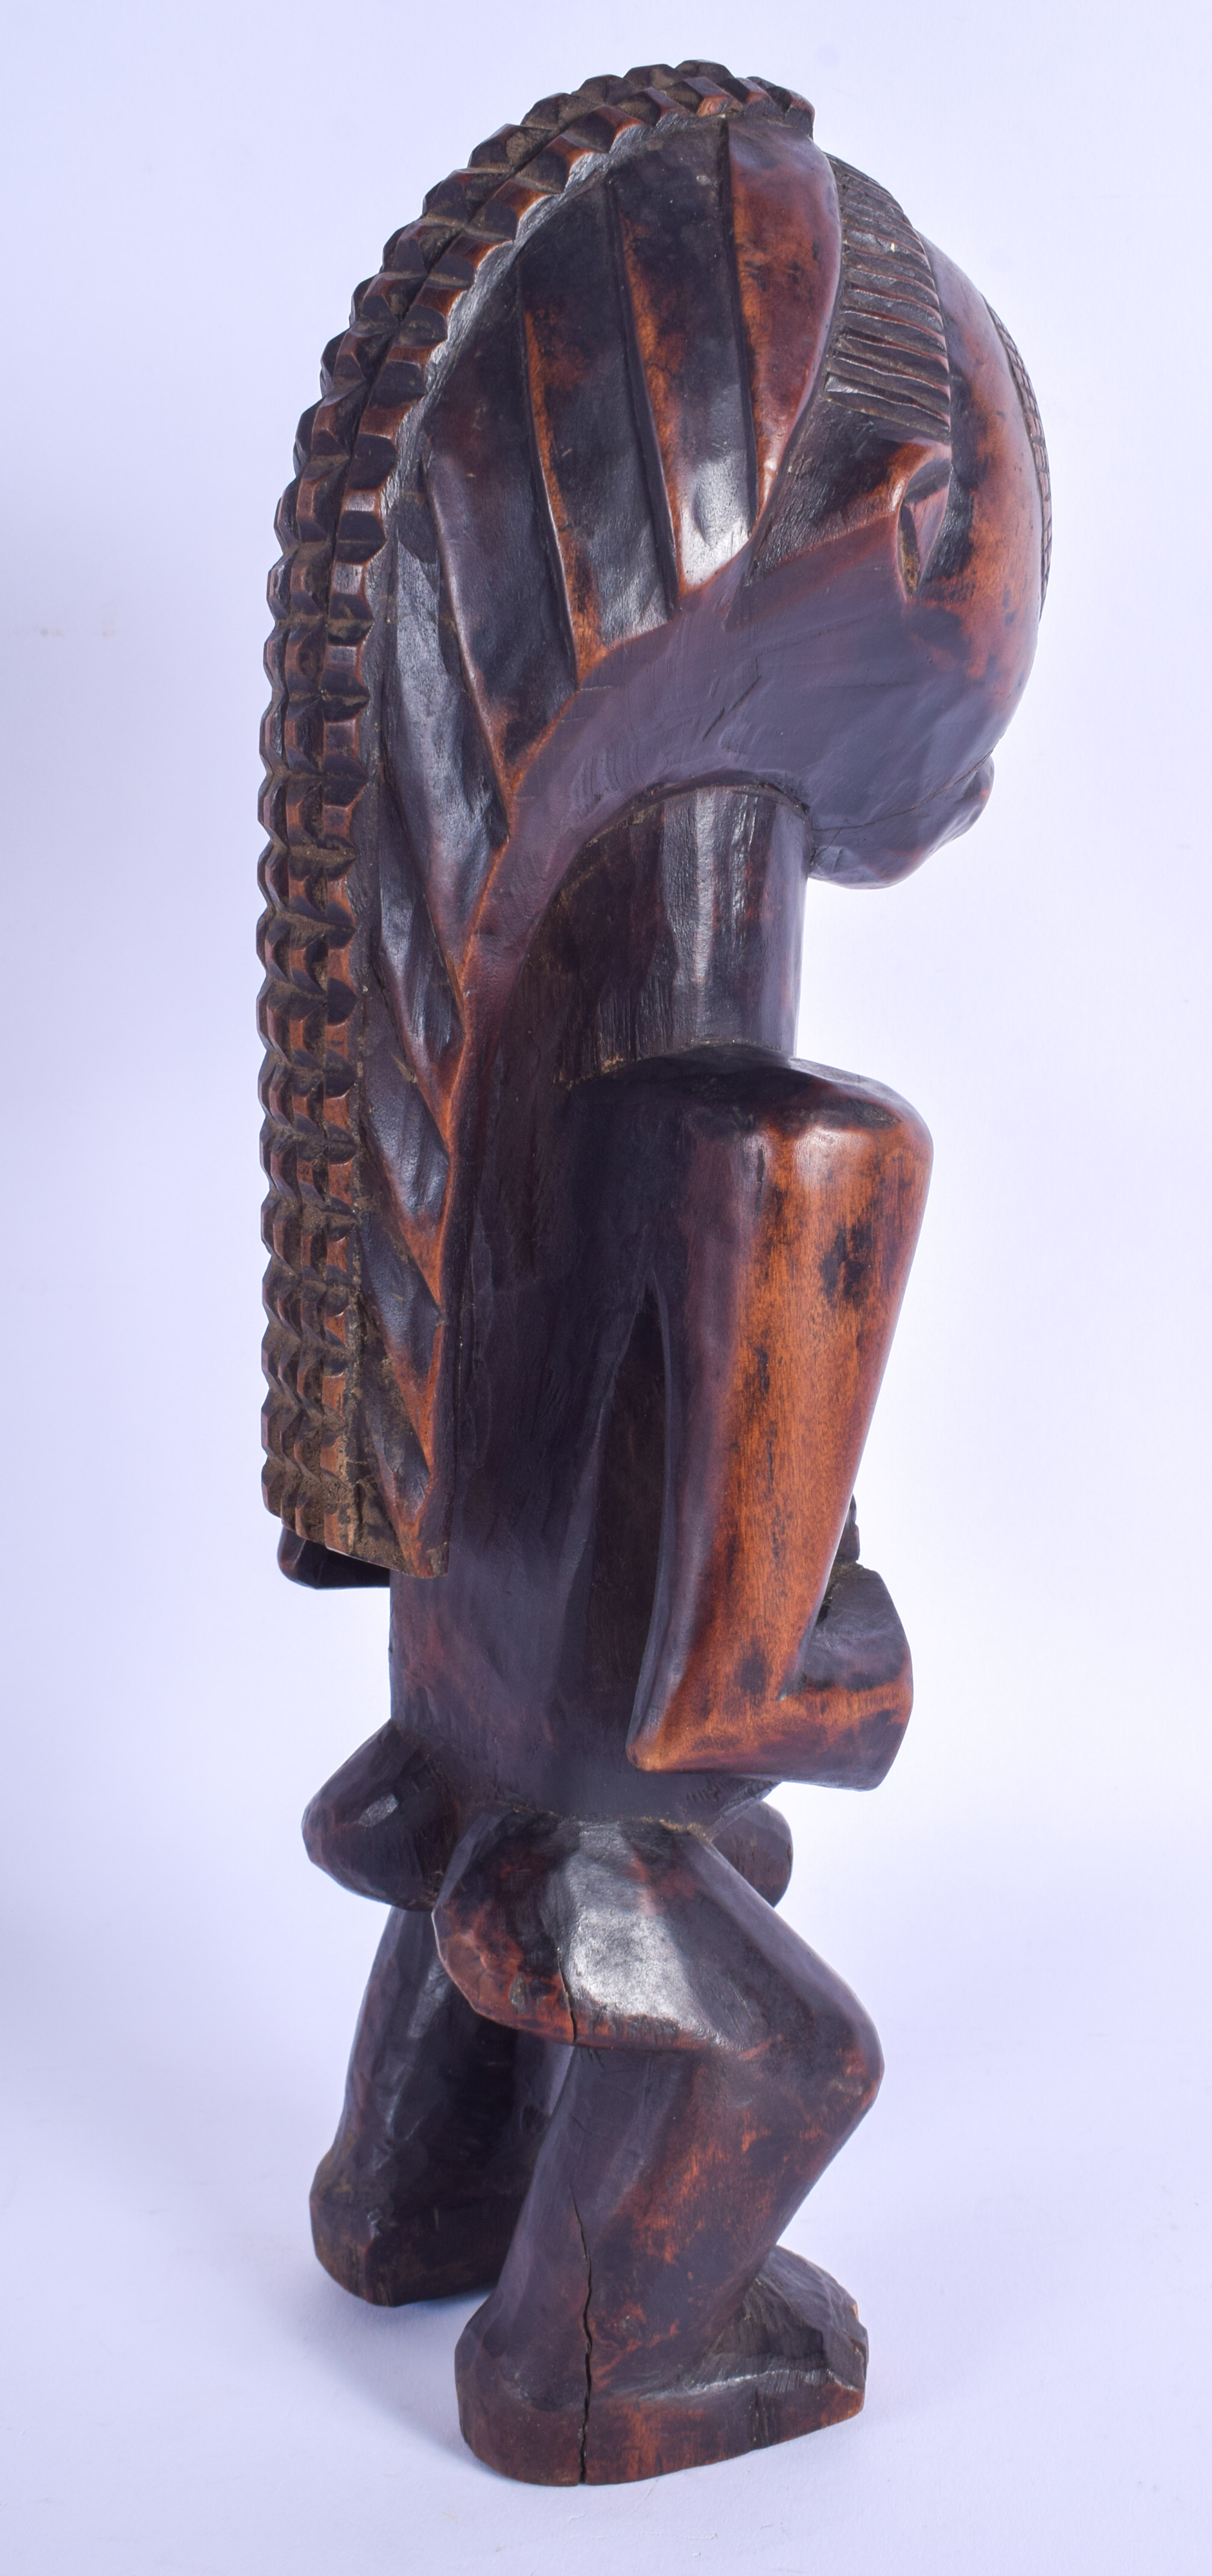 AN UNUSUAL AFRICAN TRIBAL CARVED WOOD LUBA FIGURE modelled with braided hair. 33 cm high. - Image 2 of 4